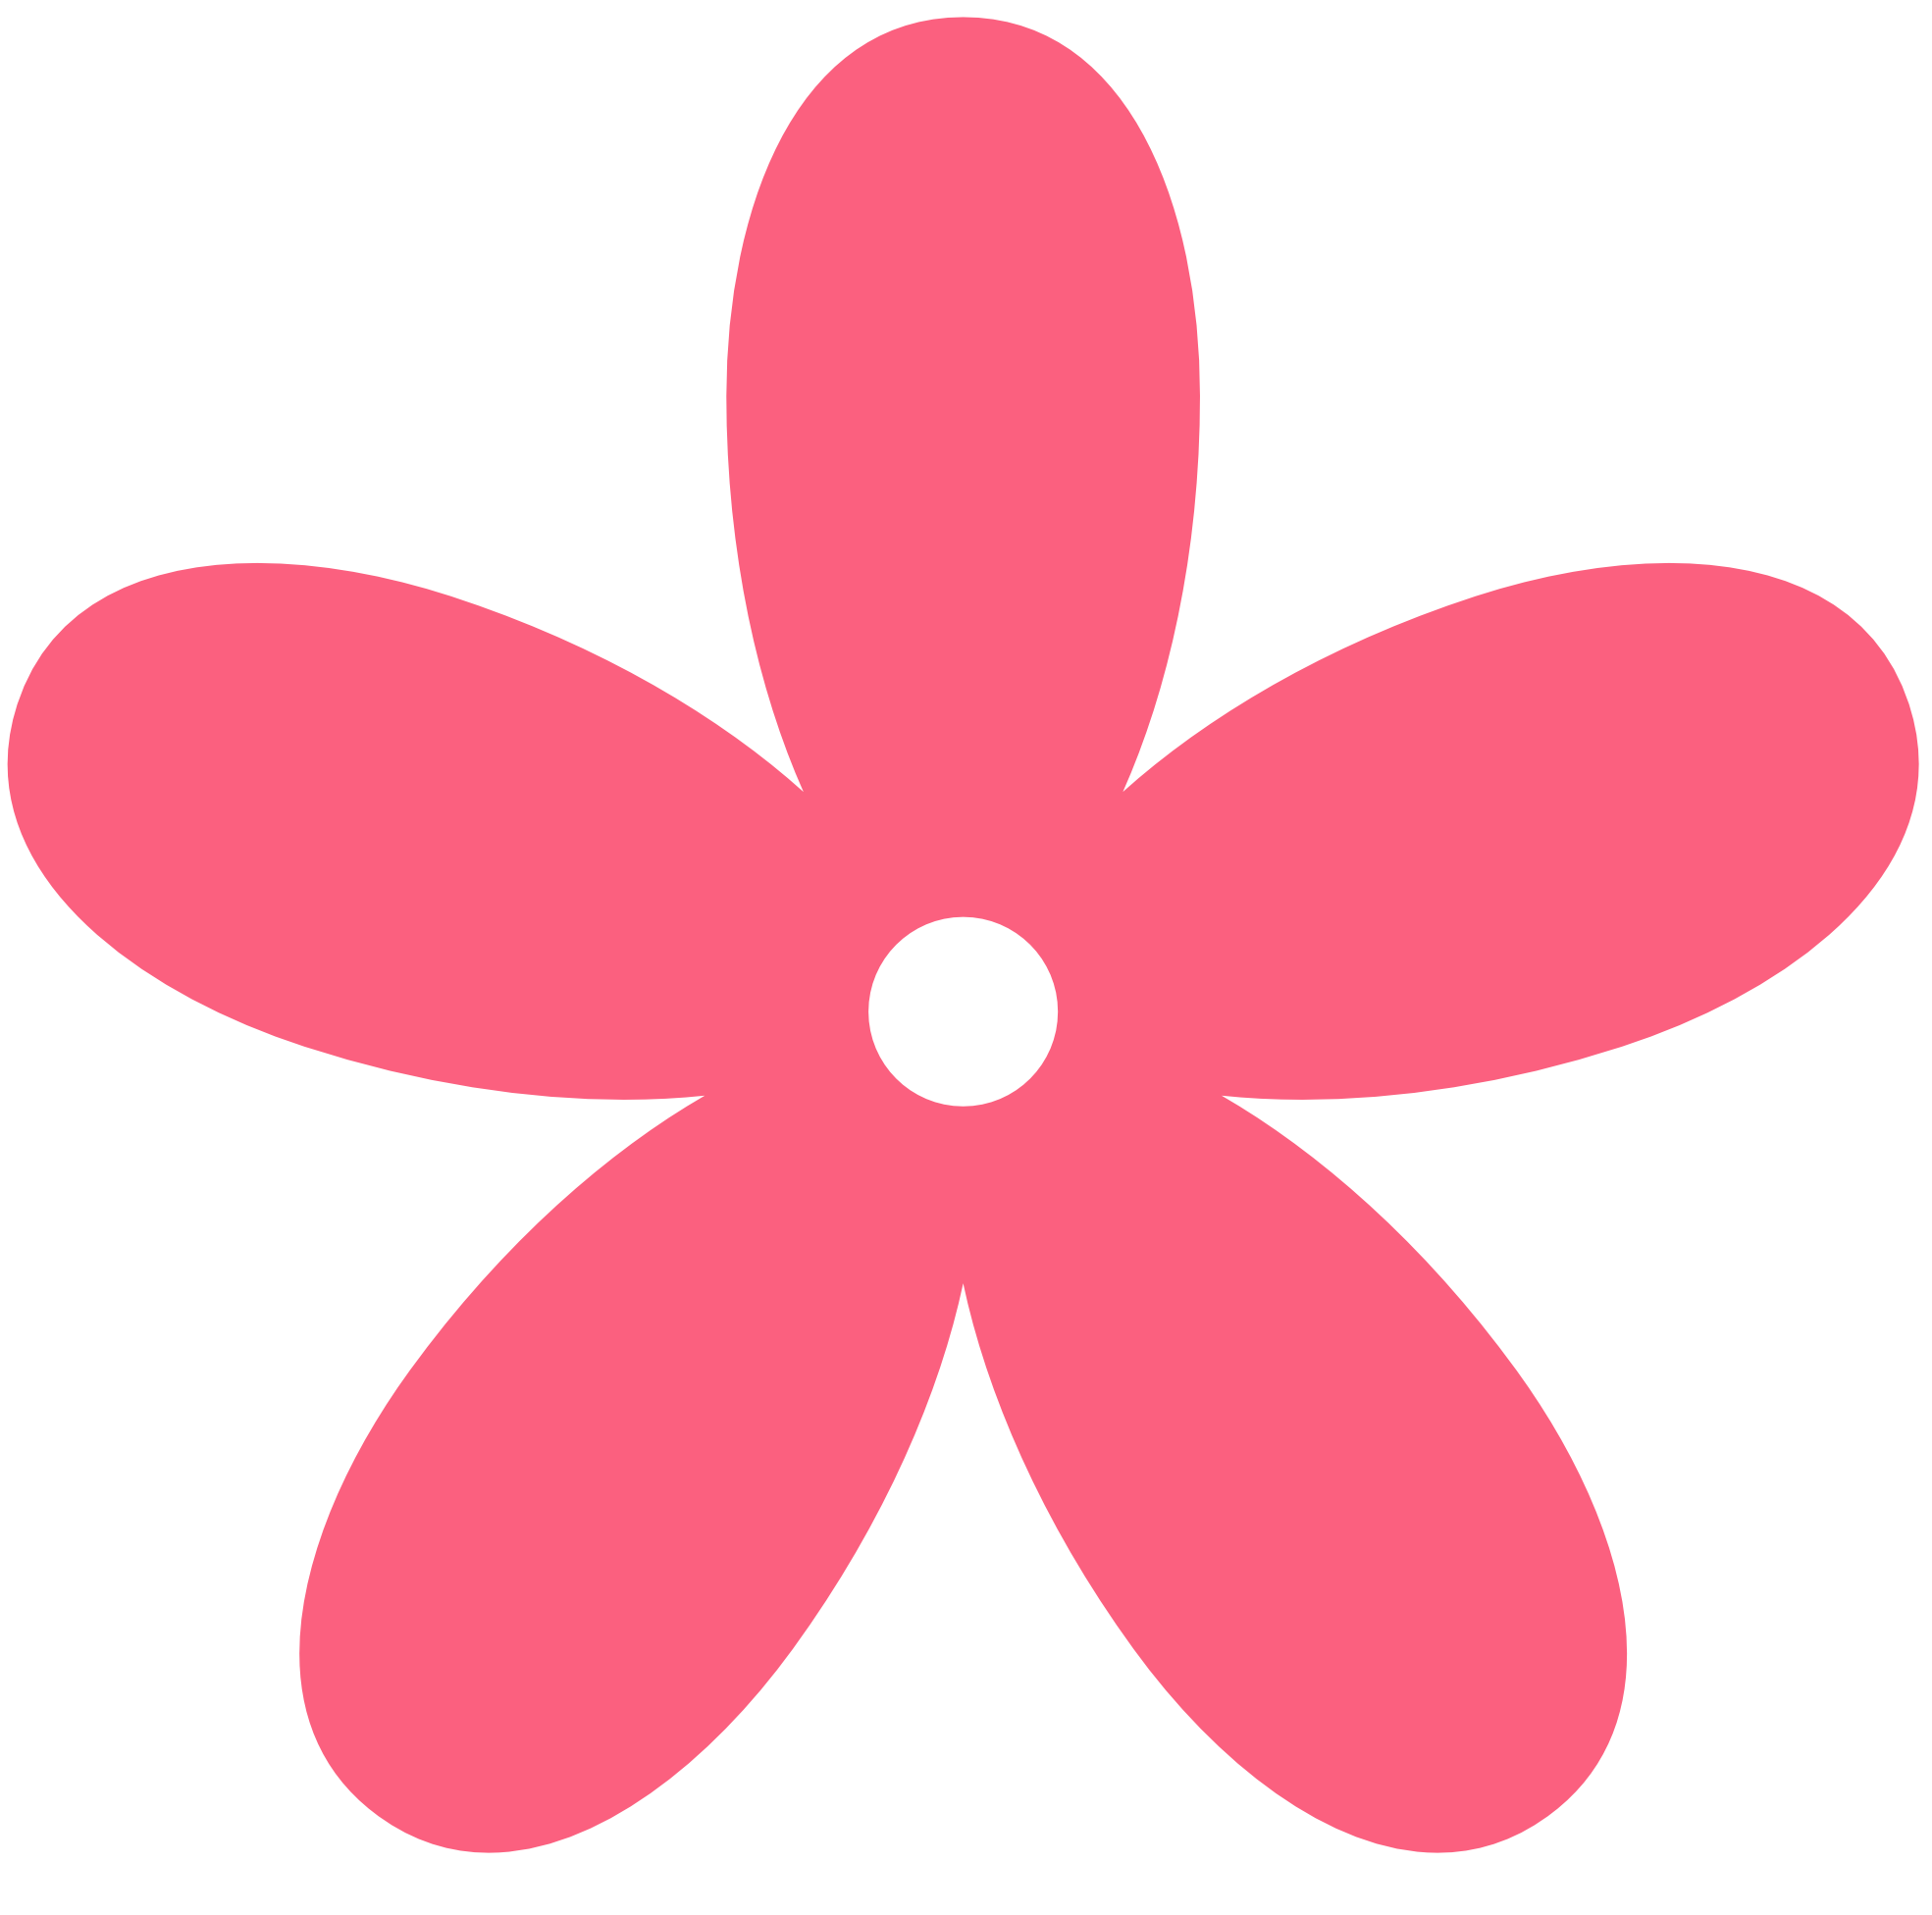 Pink Flowers Clip Art - Clipart library